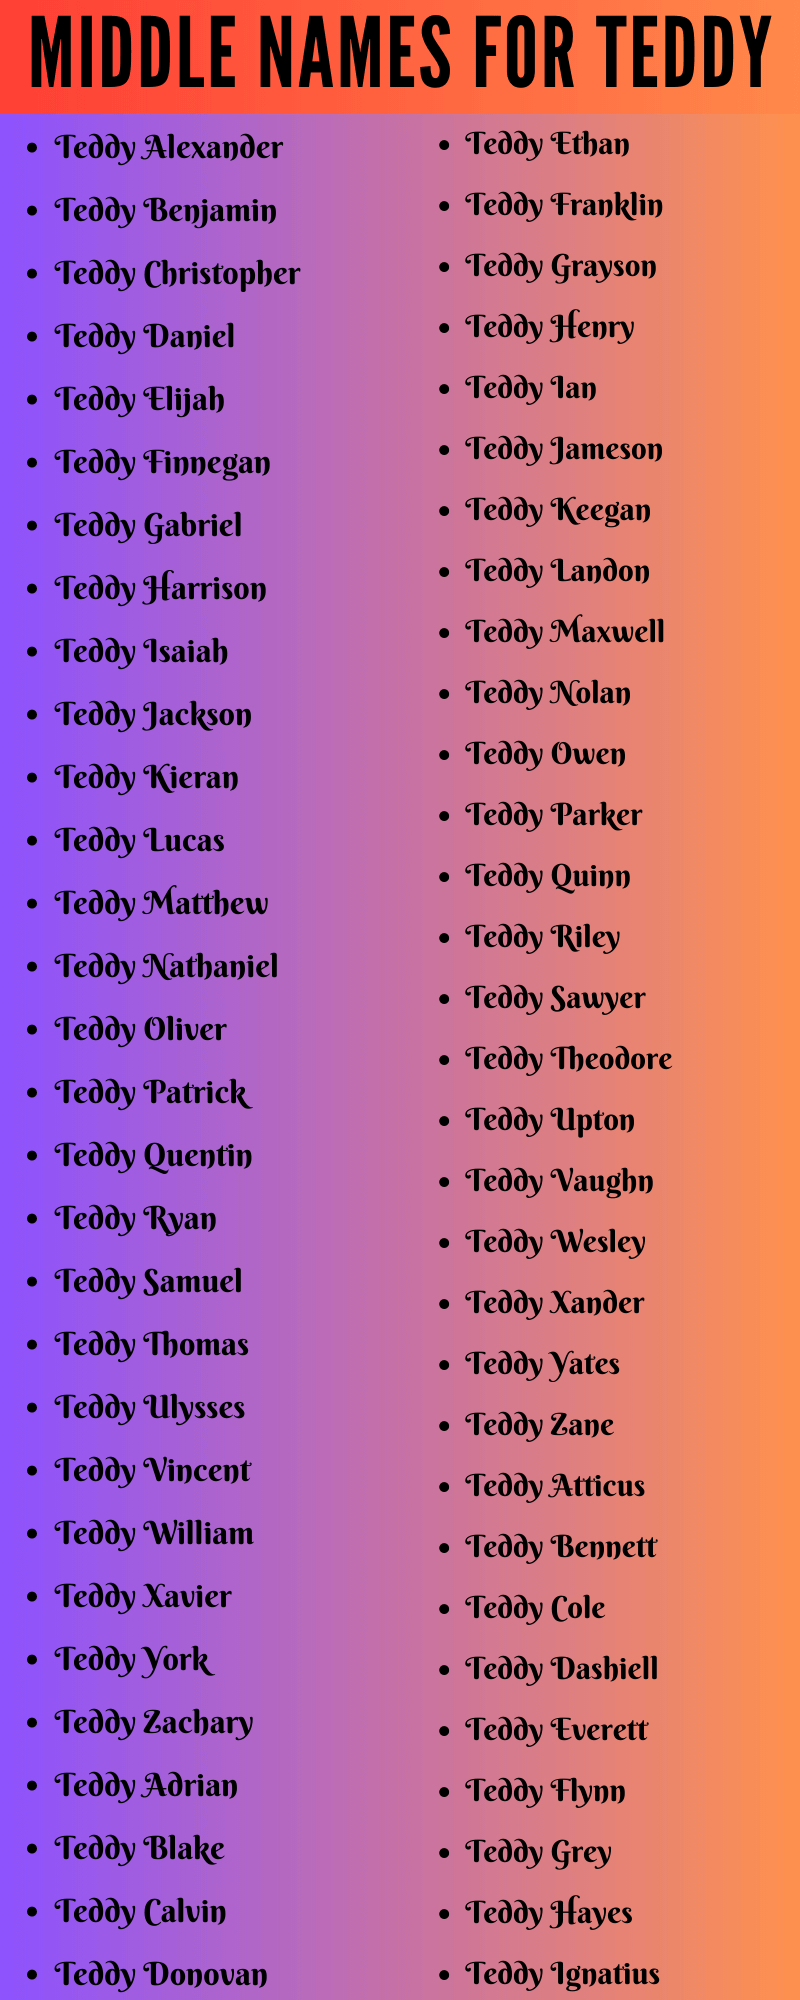 400 Creative Middle Names For Teddy